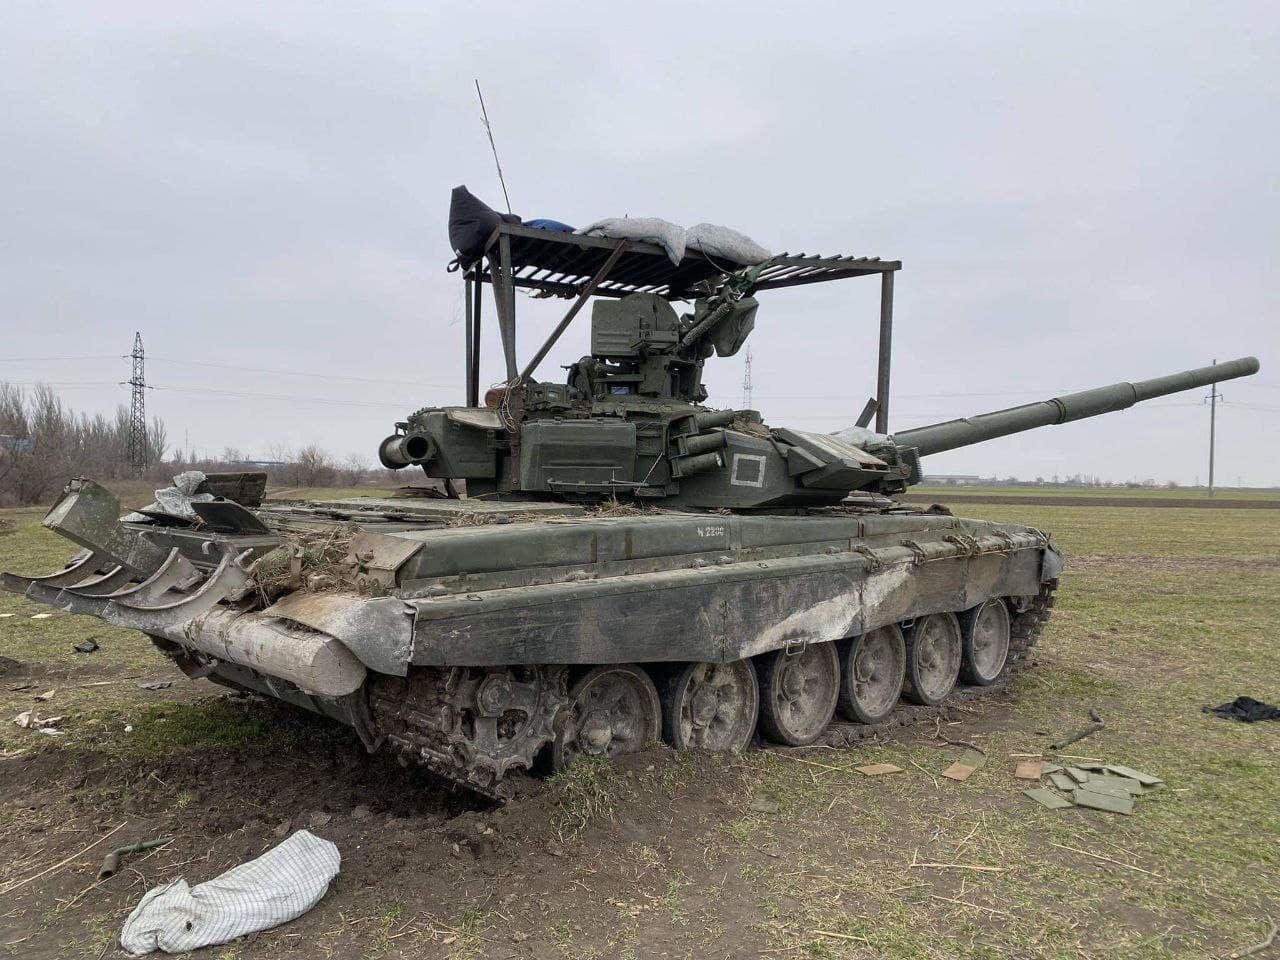 Another T-90A that was captured back in March 2022